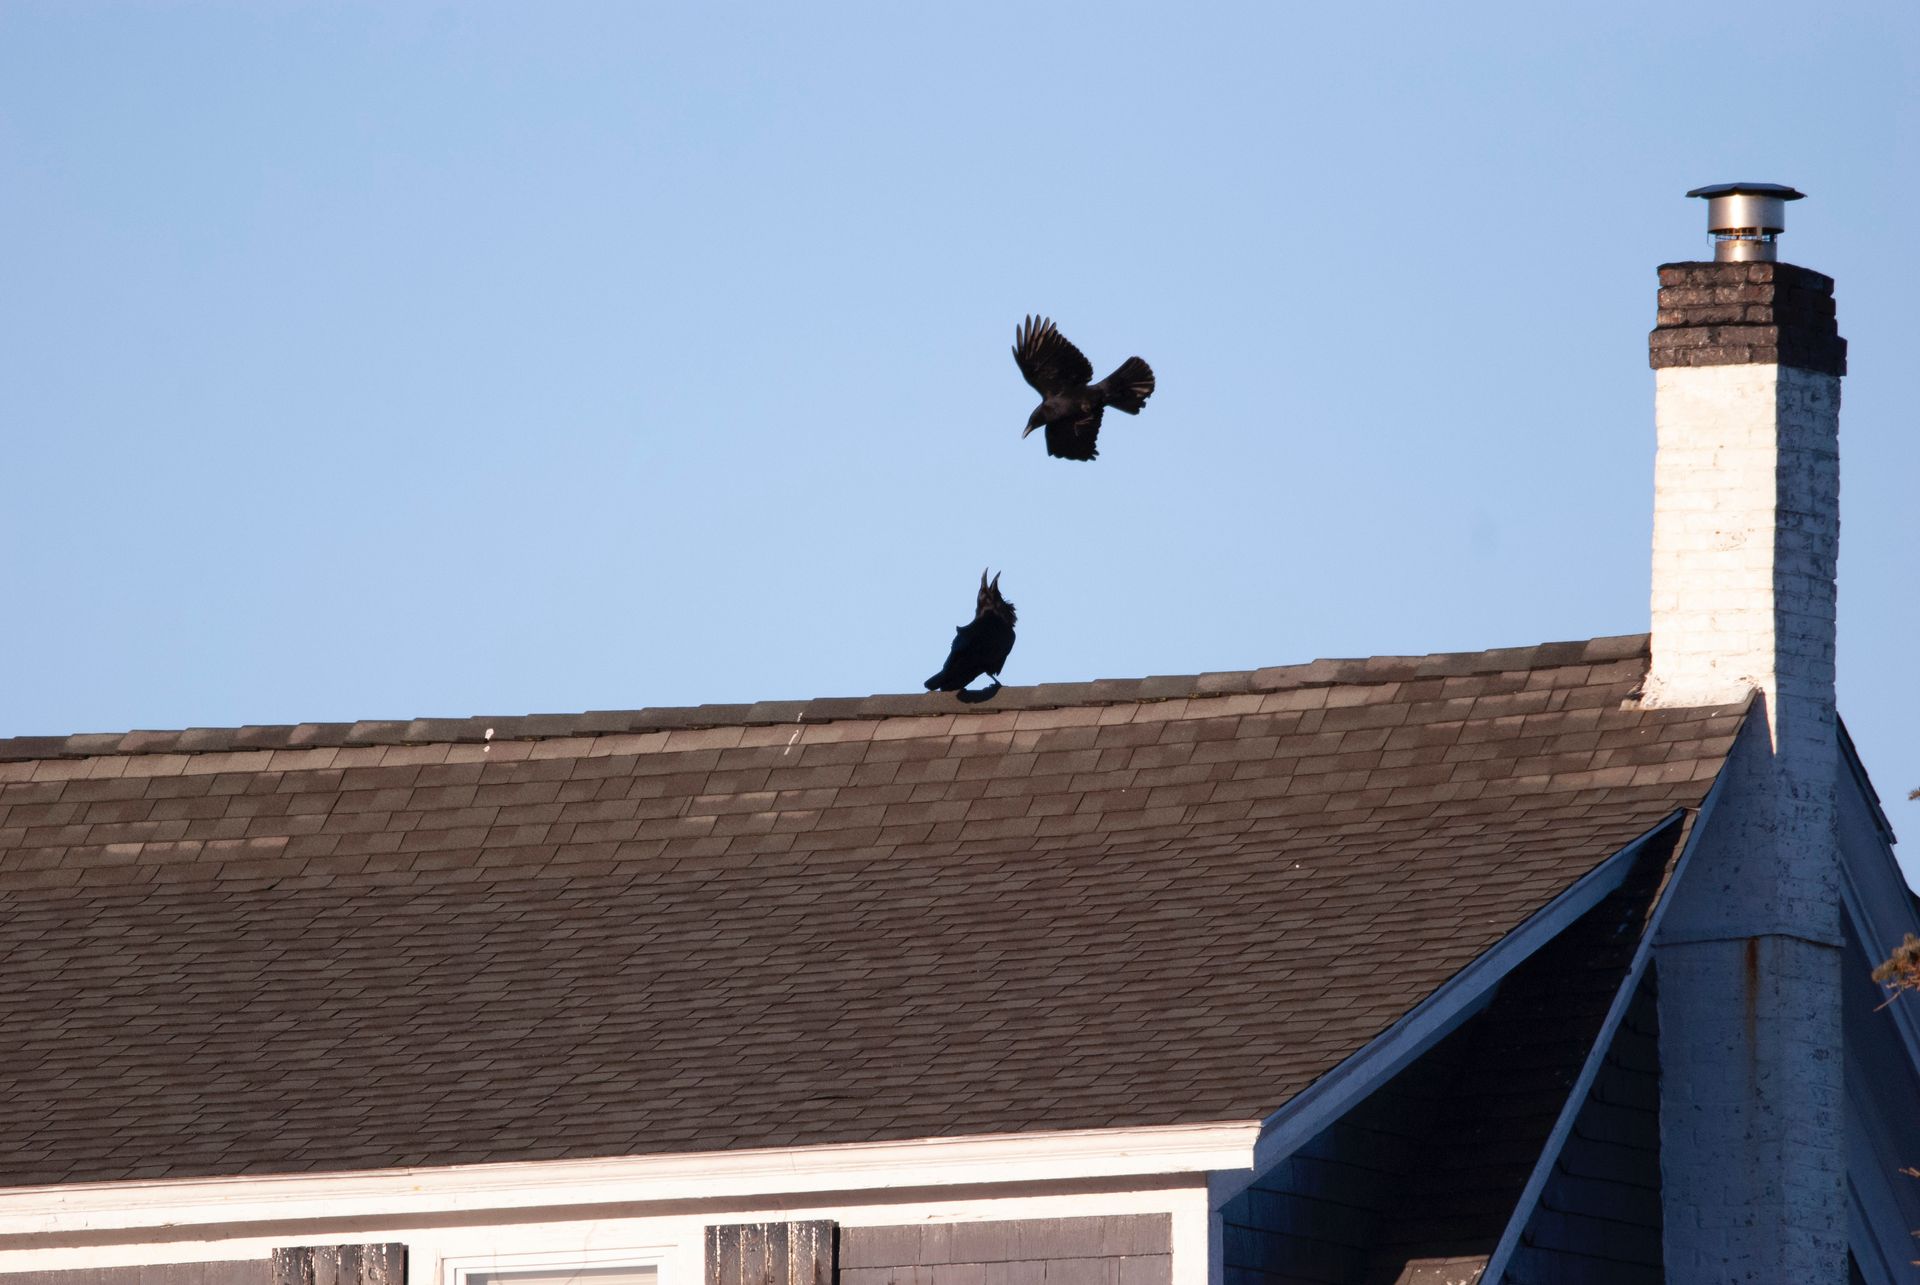 Two black birds perched on a tiled roof, silhouetted against the sky.